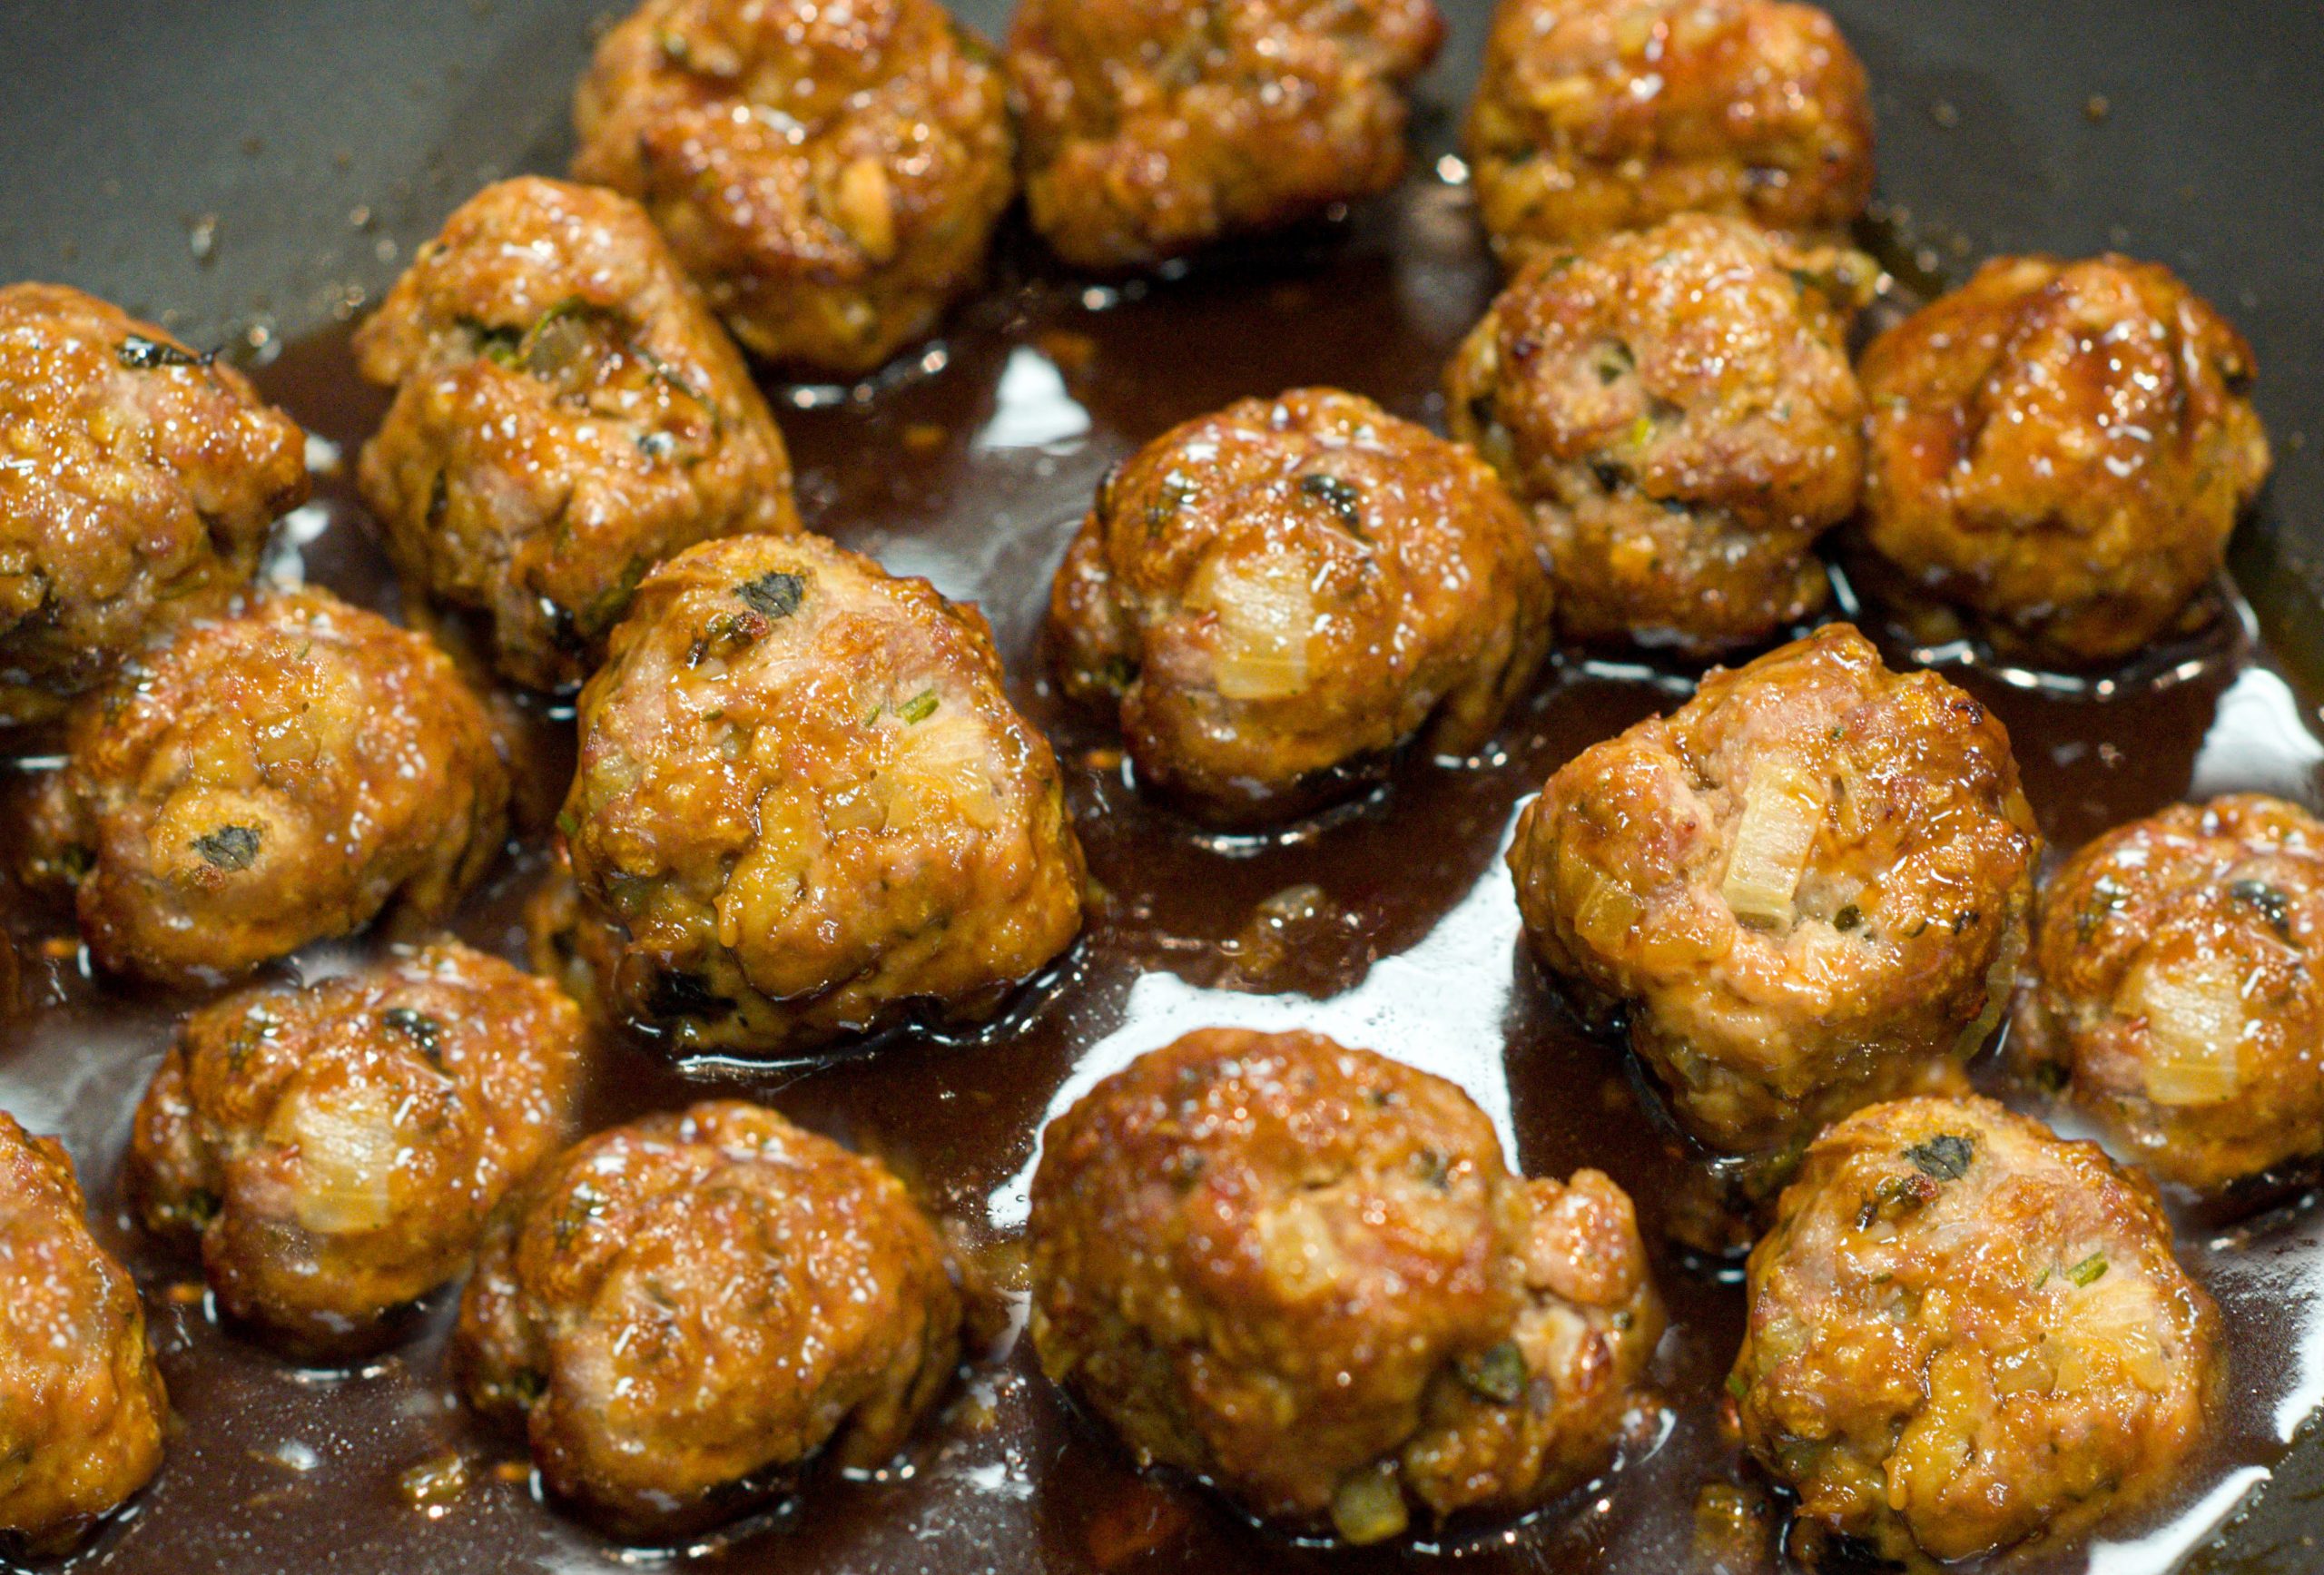 Meatballs with an Asian Inspired Glaze